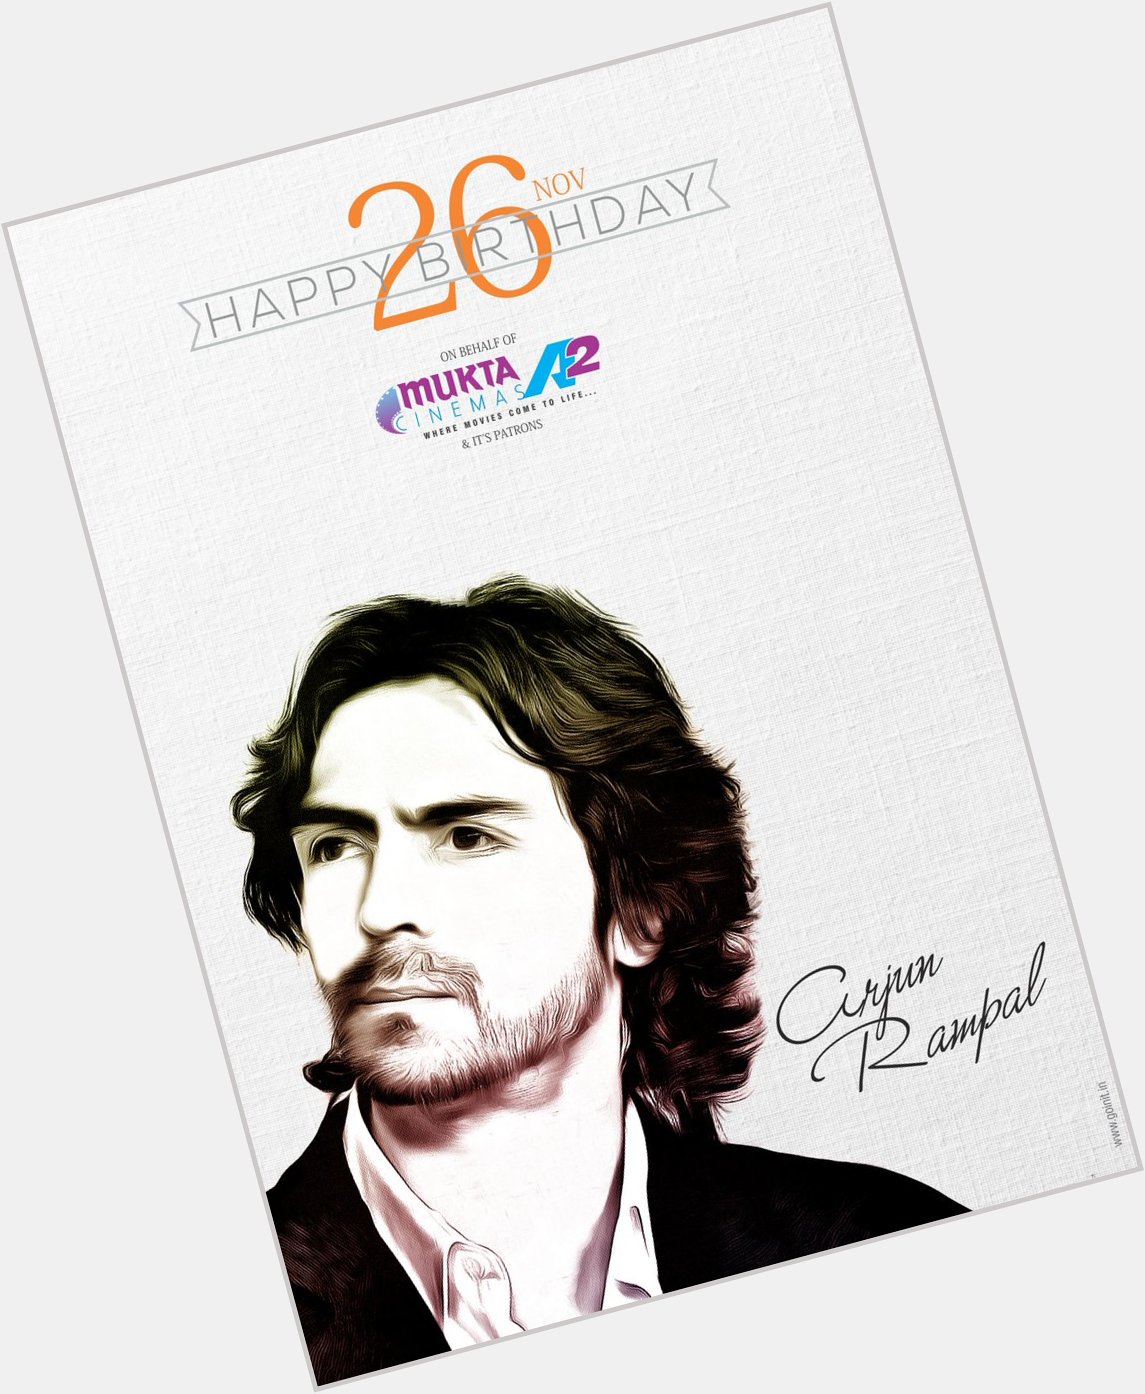 Mukta A2 Cinemas would like to wish a joyous Happy Birthday.

Which is your favorite Arjun Rampal movie? 